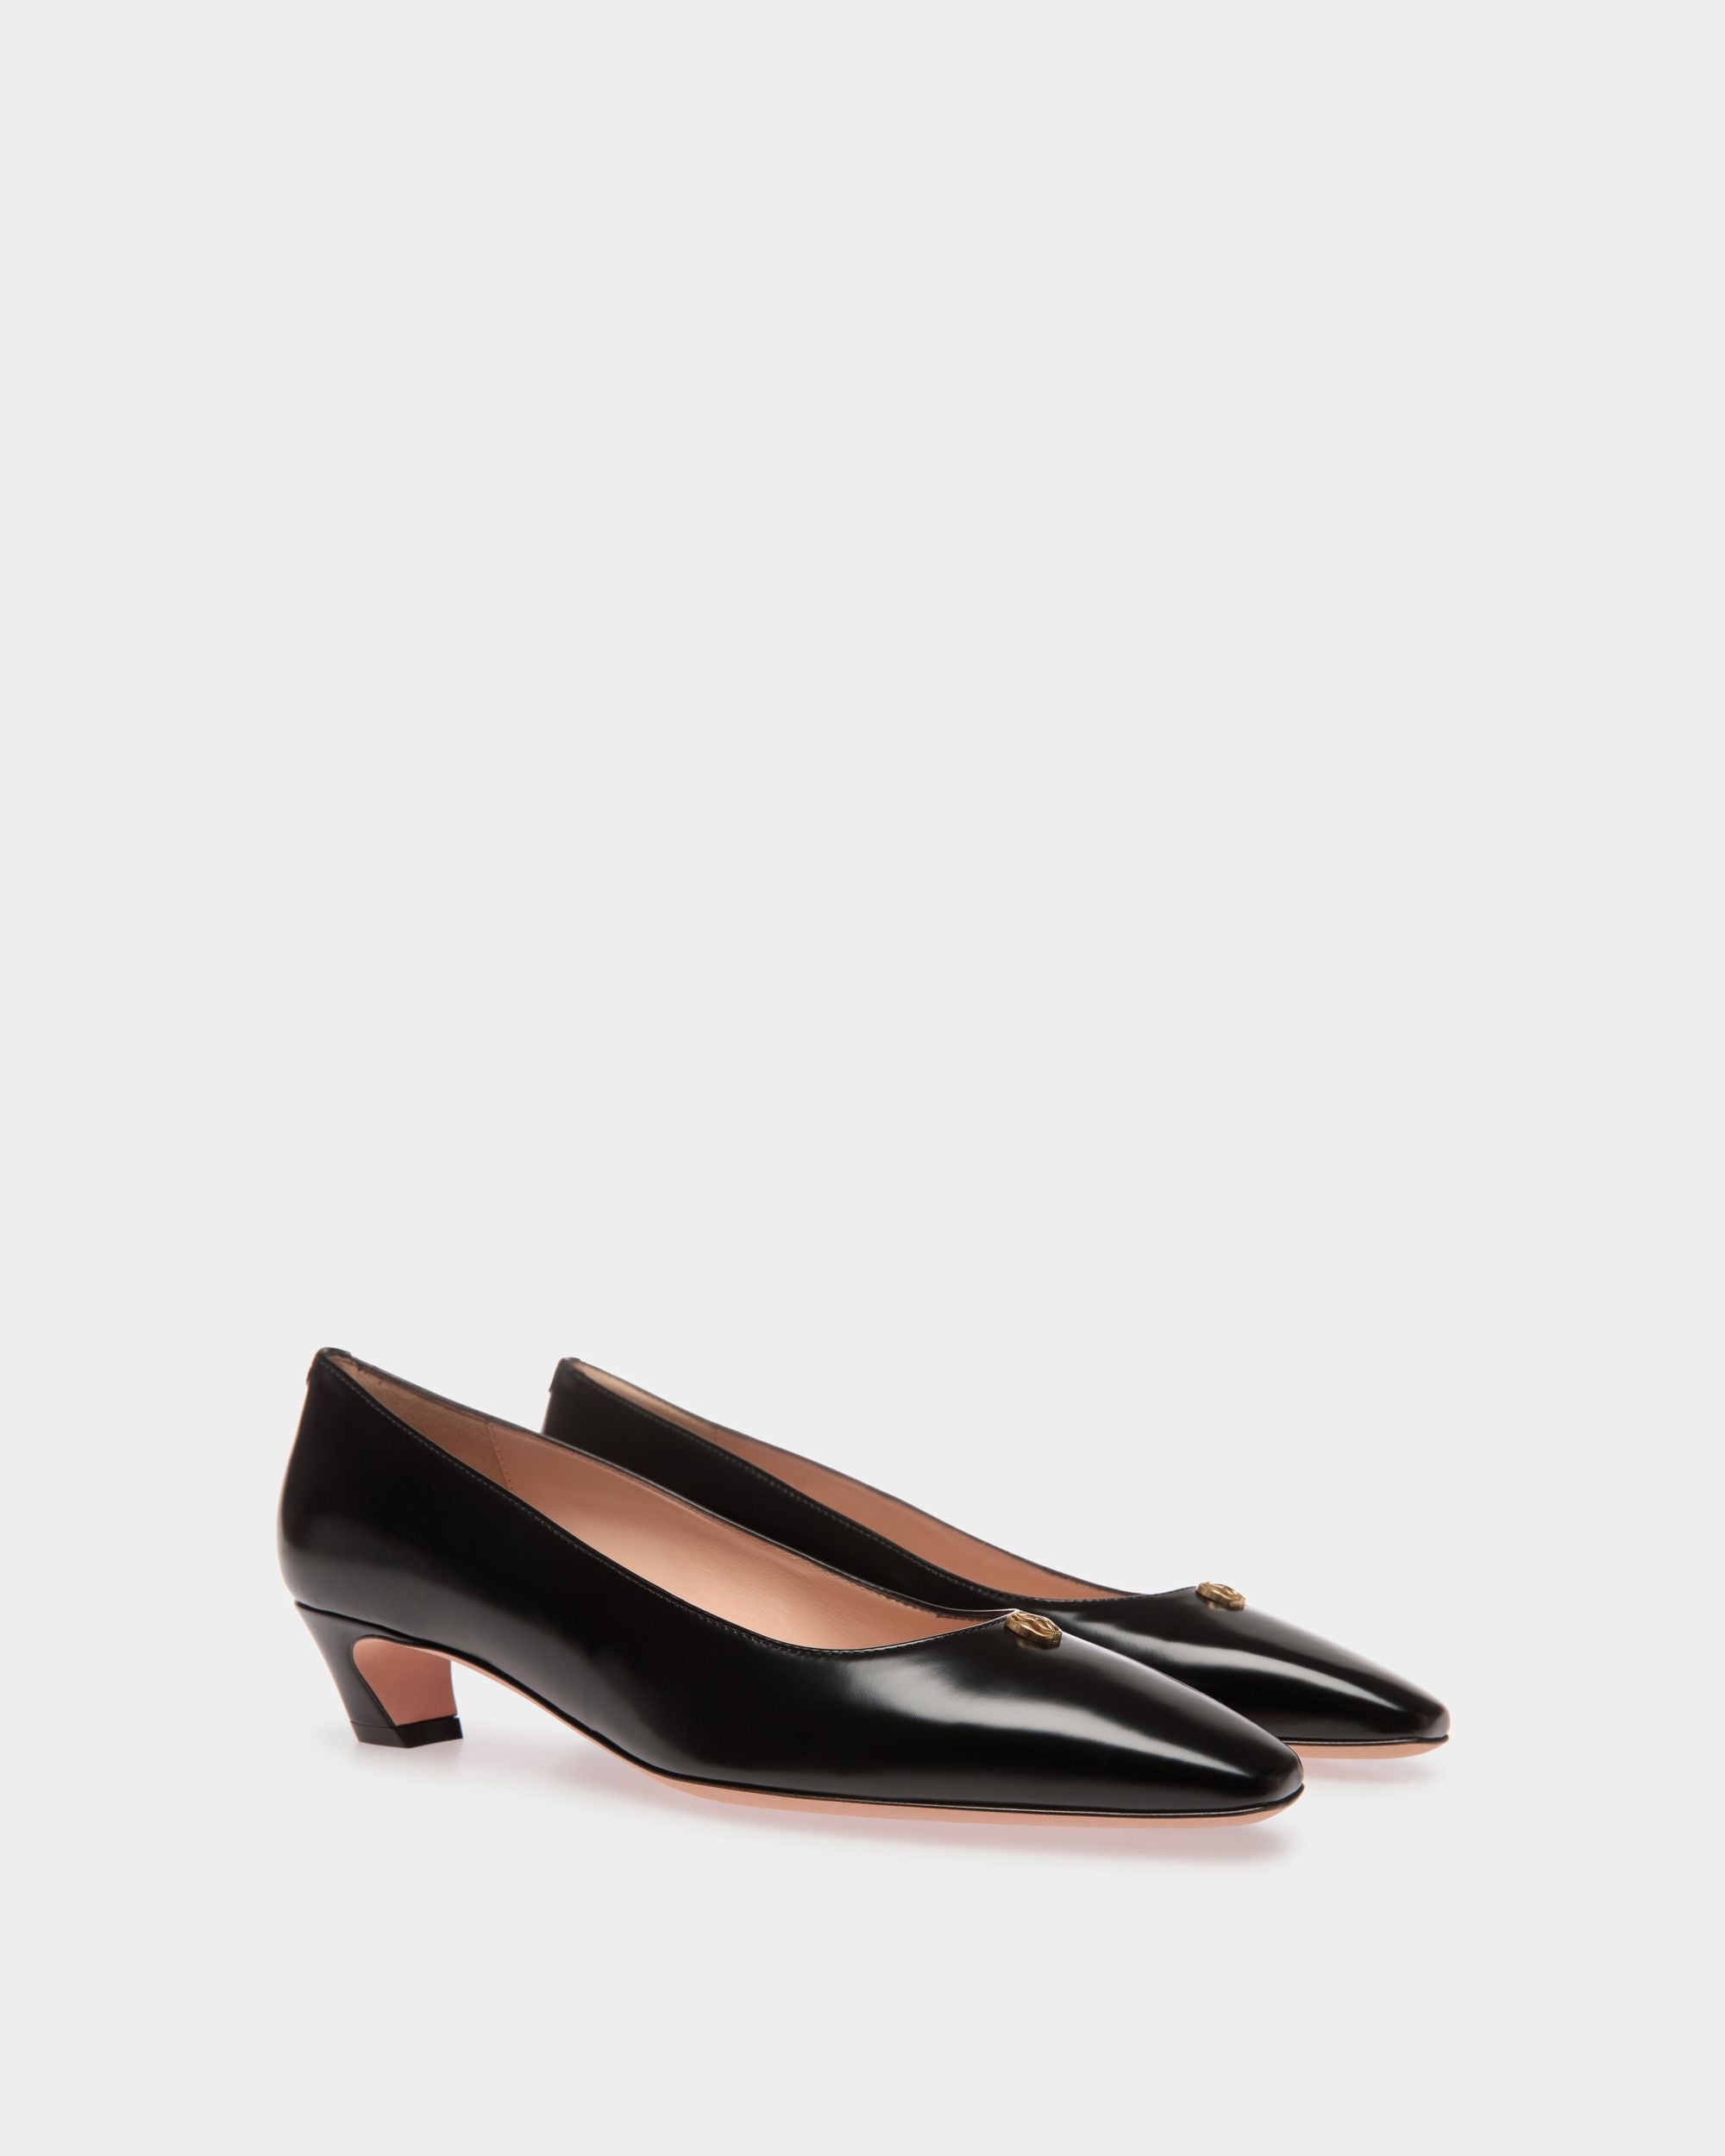 Sylt | Women's Pump in Black Leather | Bally | Still Life 3/4 Front